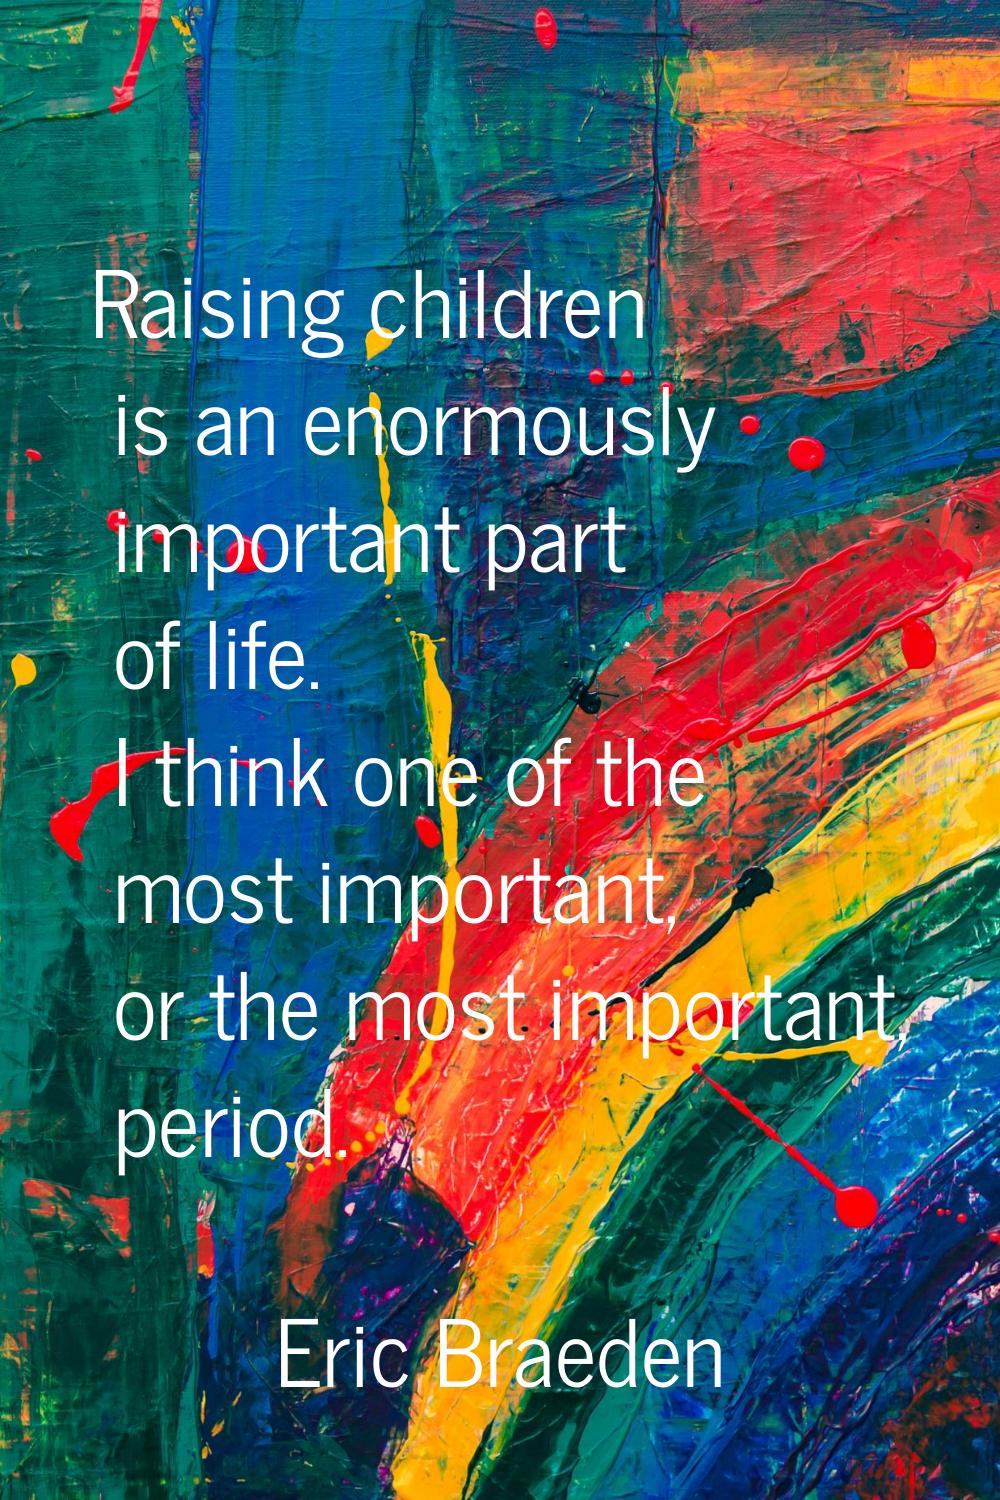 Raising children is an enormously important part of life. I think one of the most important, or the